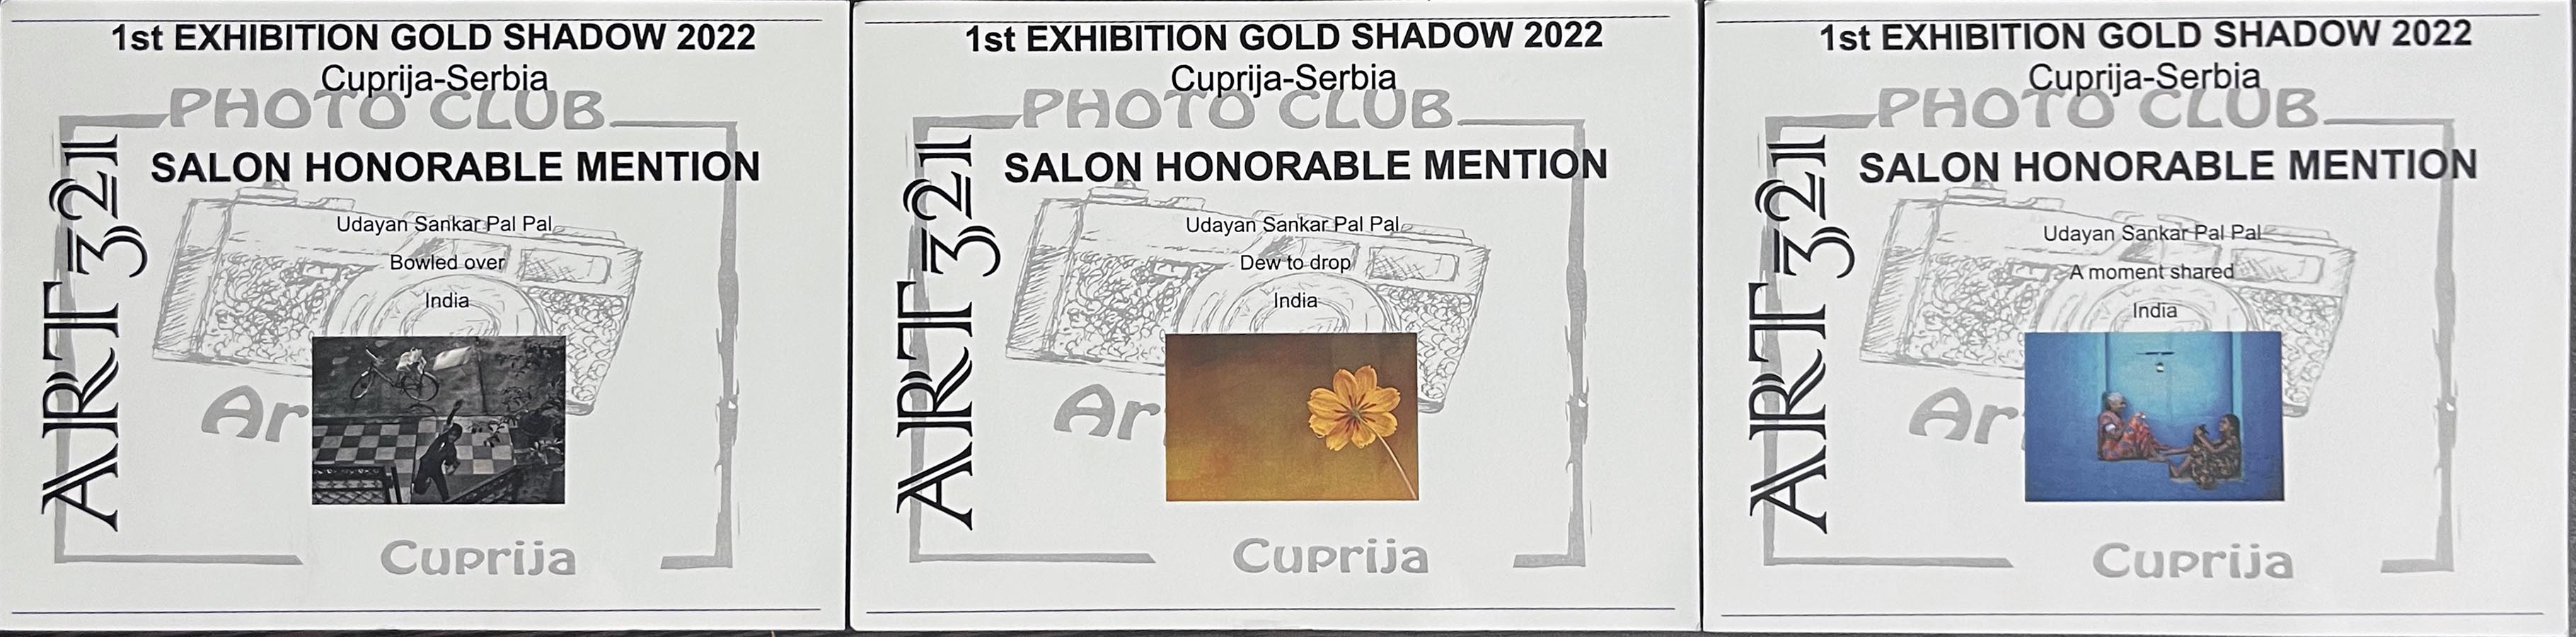 Gold Shadow-2022